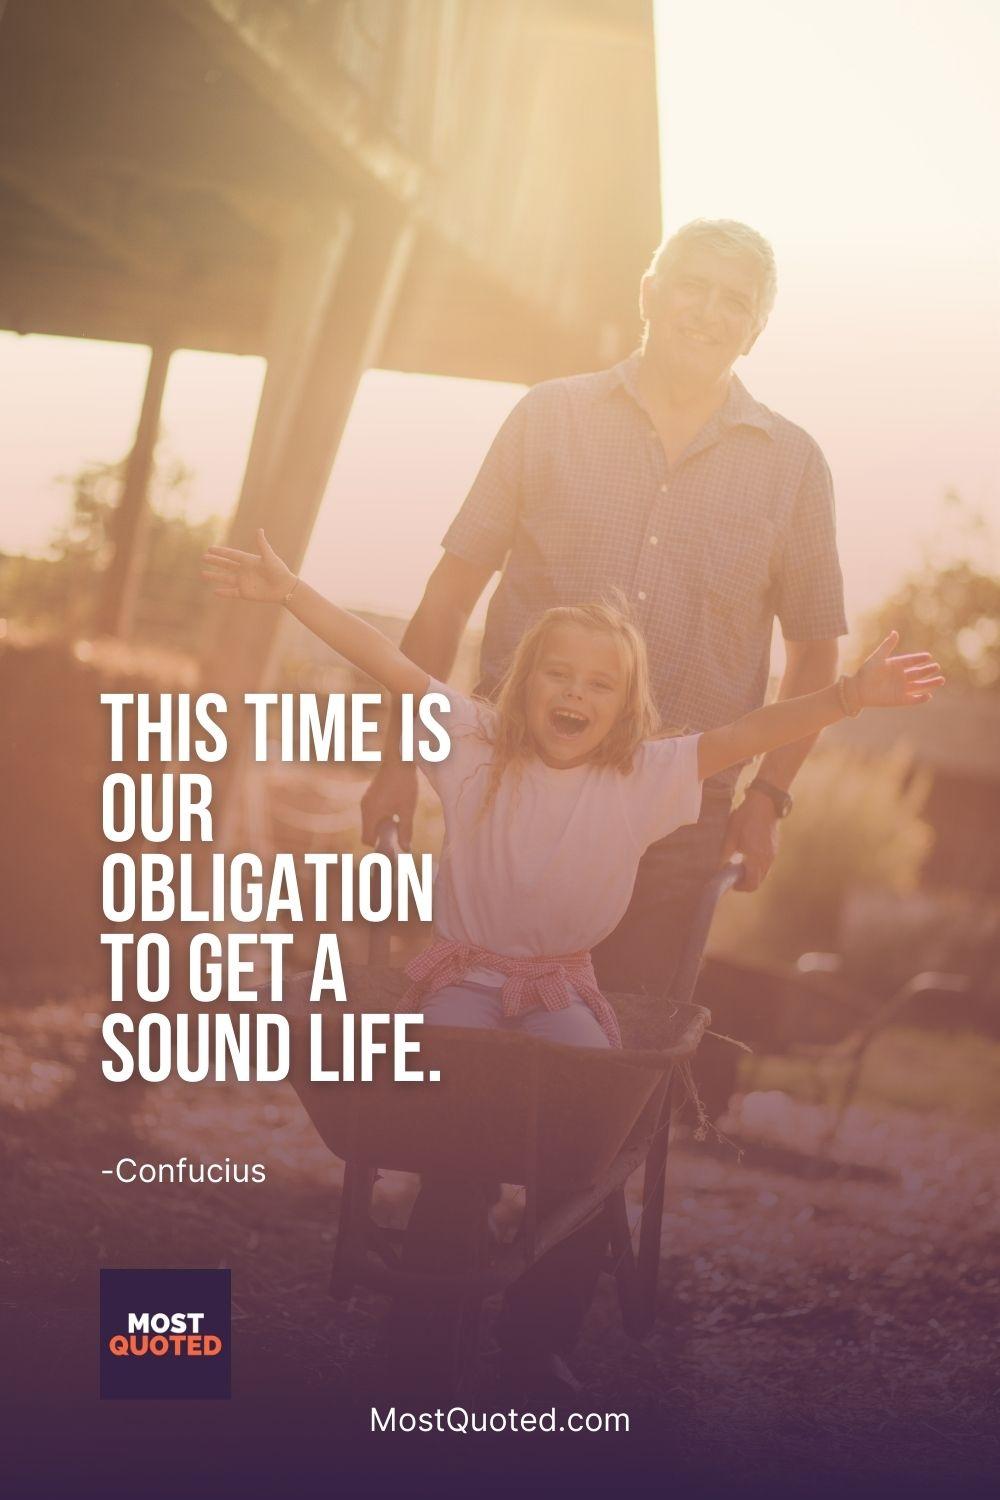 This time is our obligation to get a sound life. - Confucius